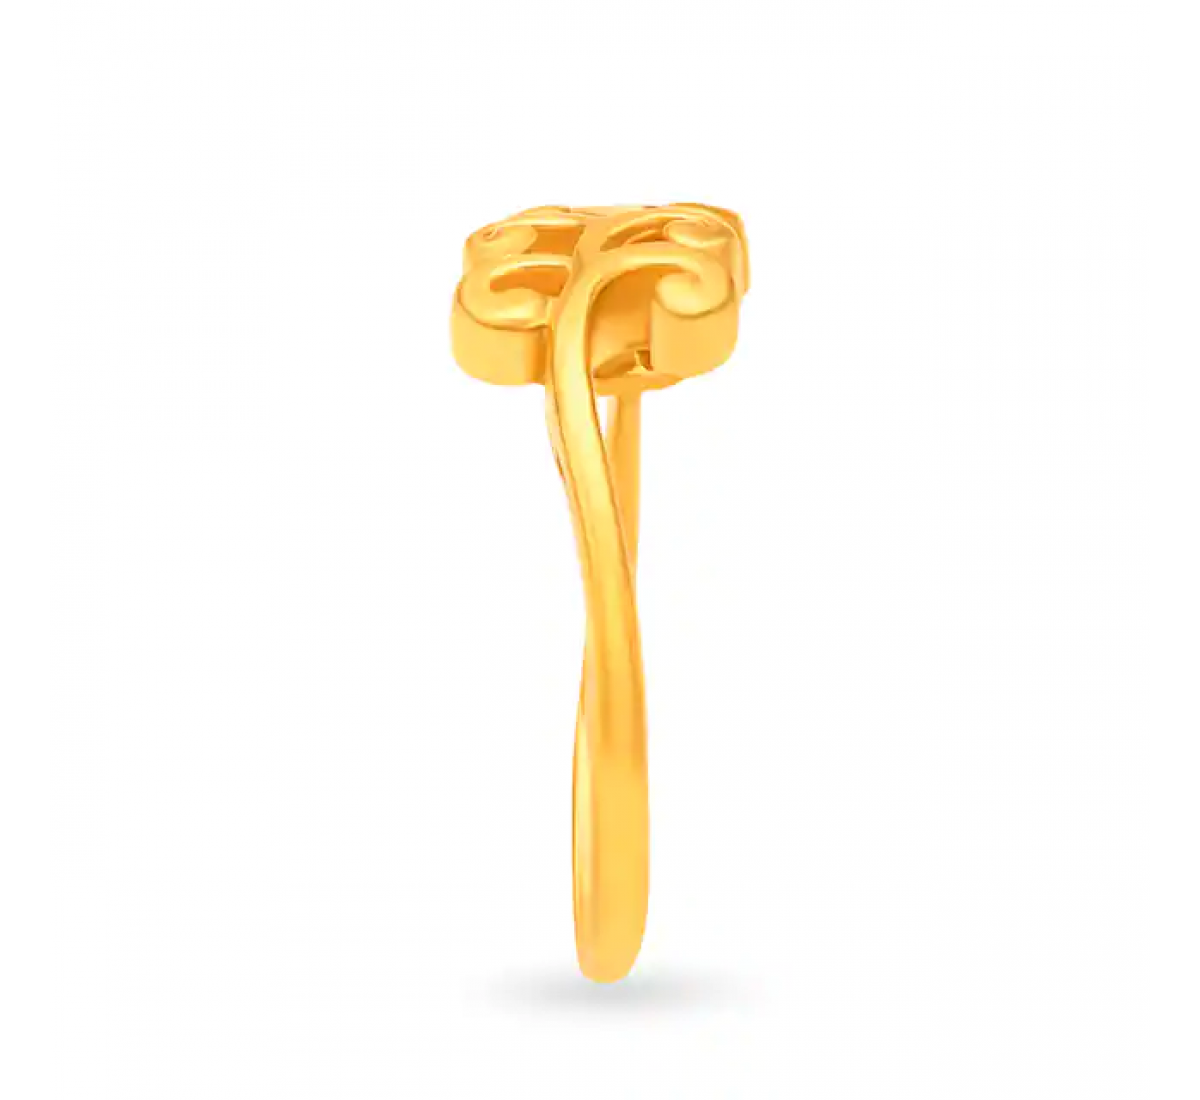 Sublime Carved Gold Ring